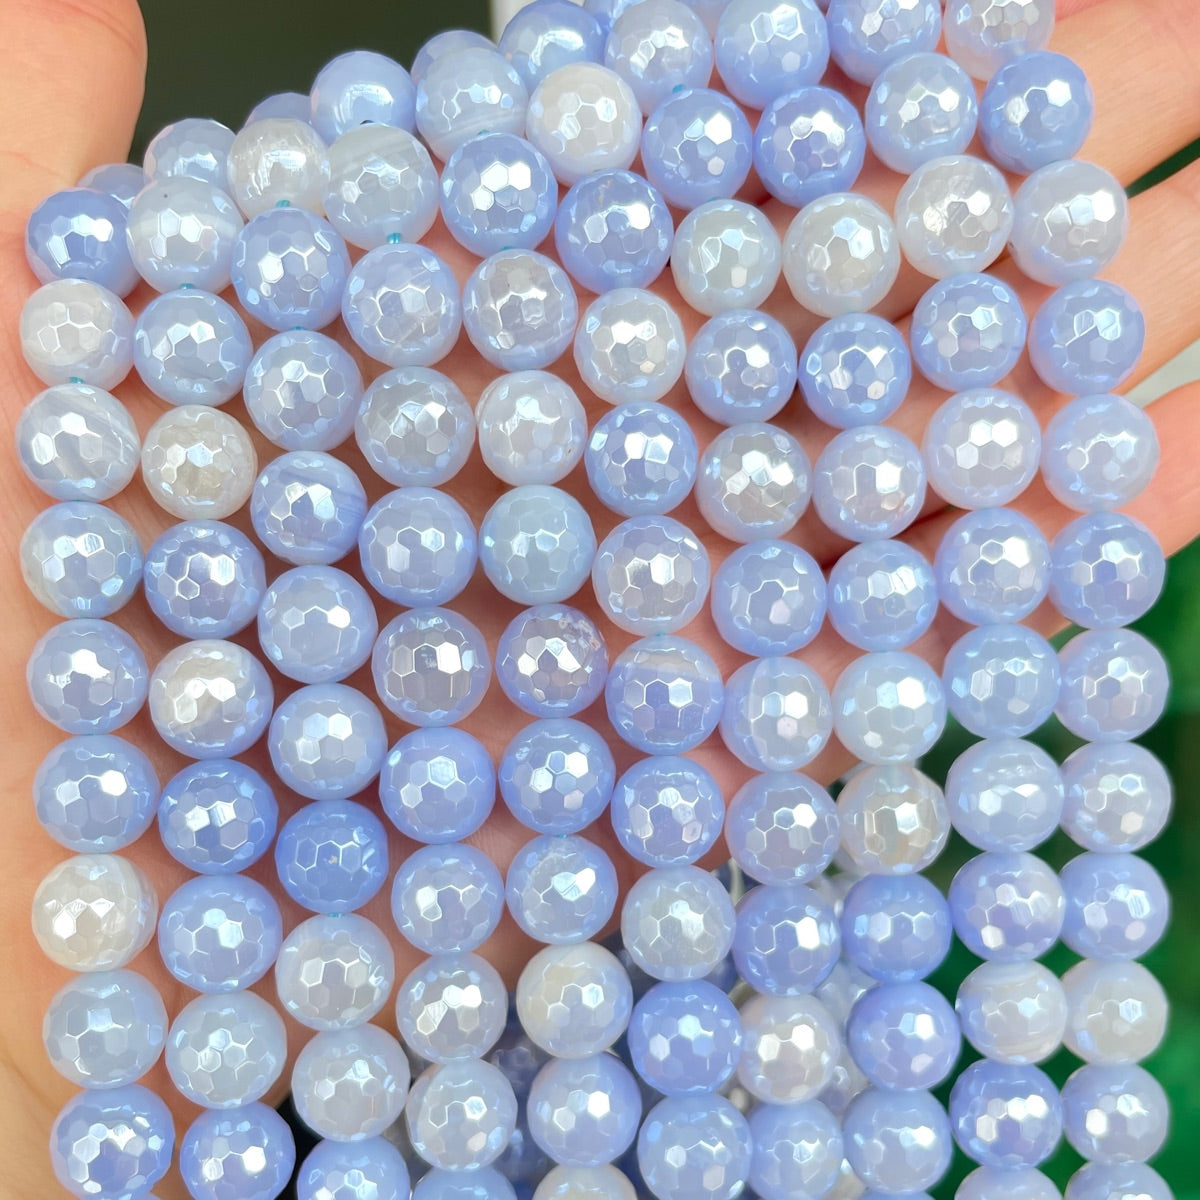 10mm Electroplated Blue Agate Stone Faceted Beads-Grade A Premium Quality Electroplated Beads New Beads Arrivals Premium Quality Agate Beads Charms Beads Beyond